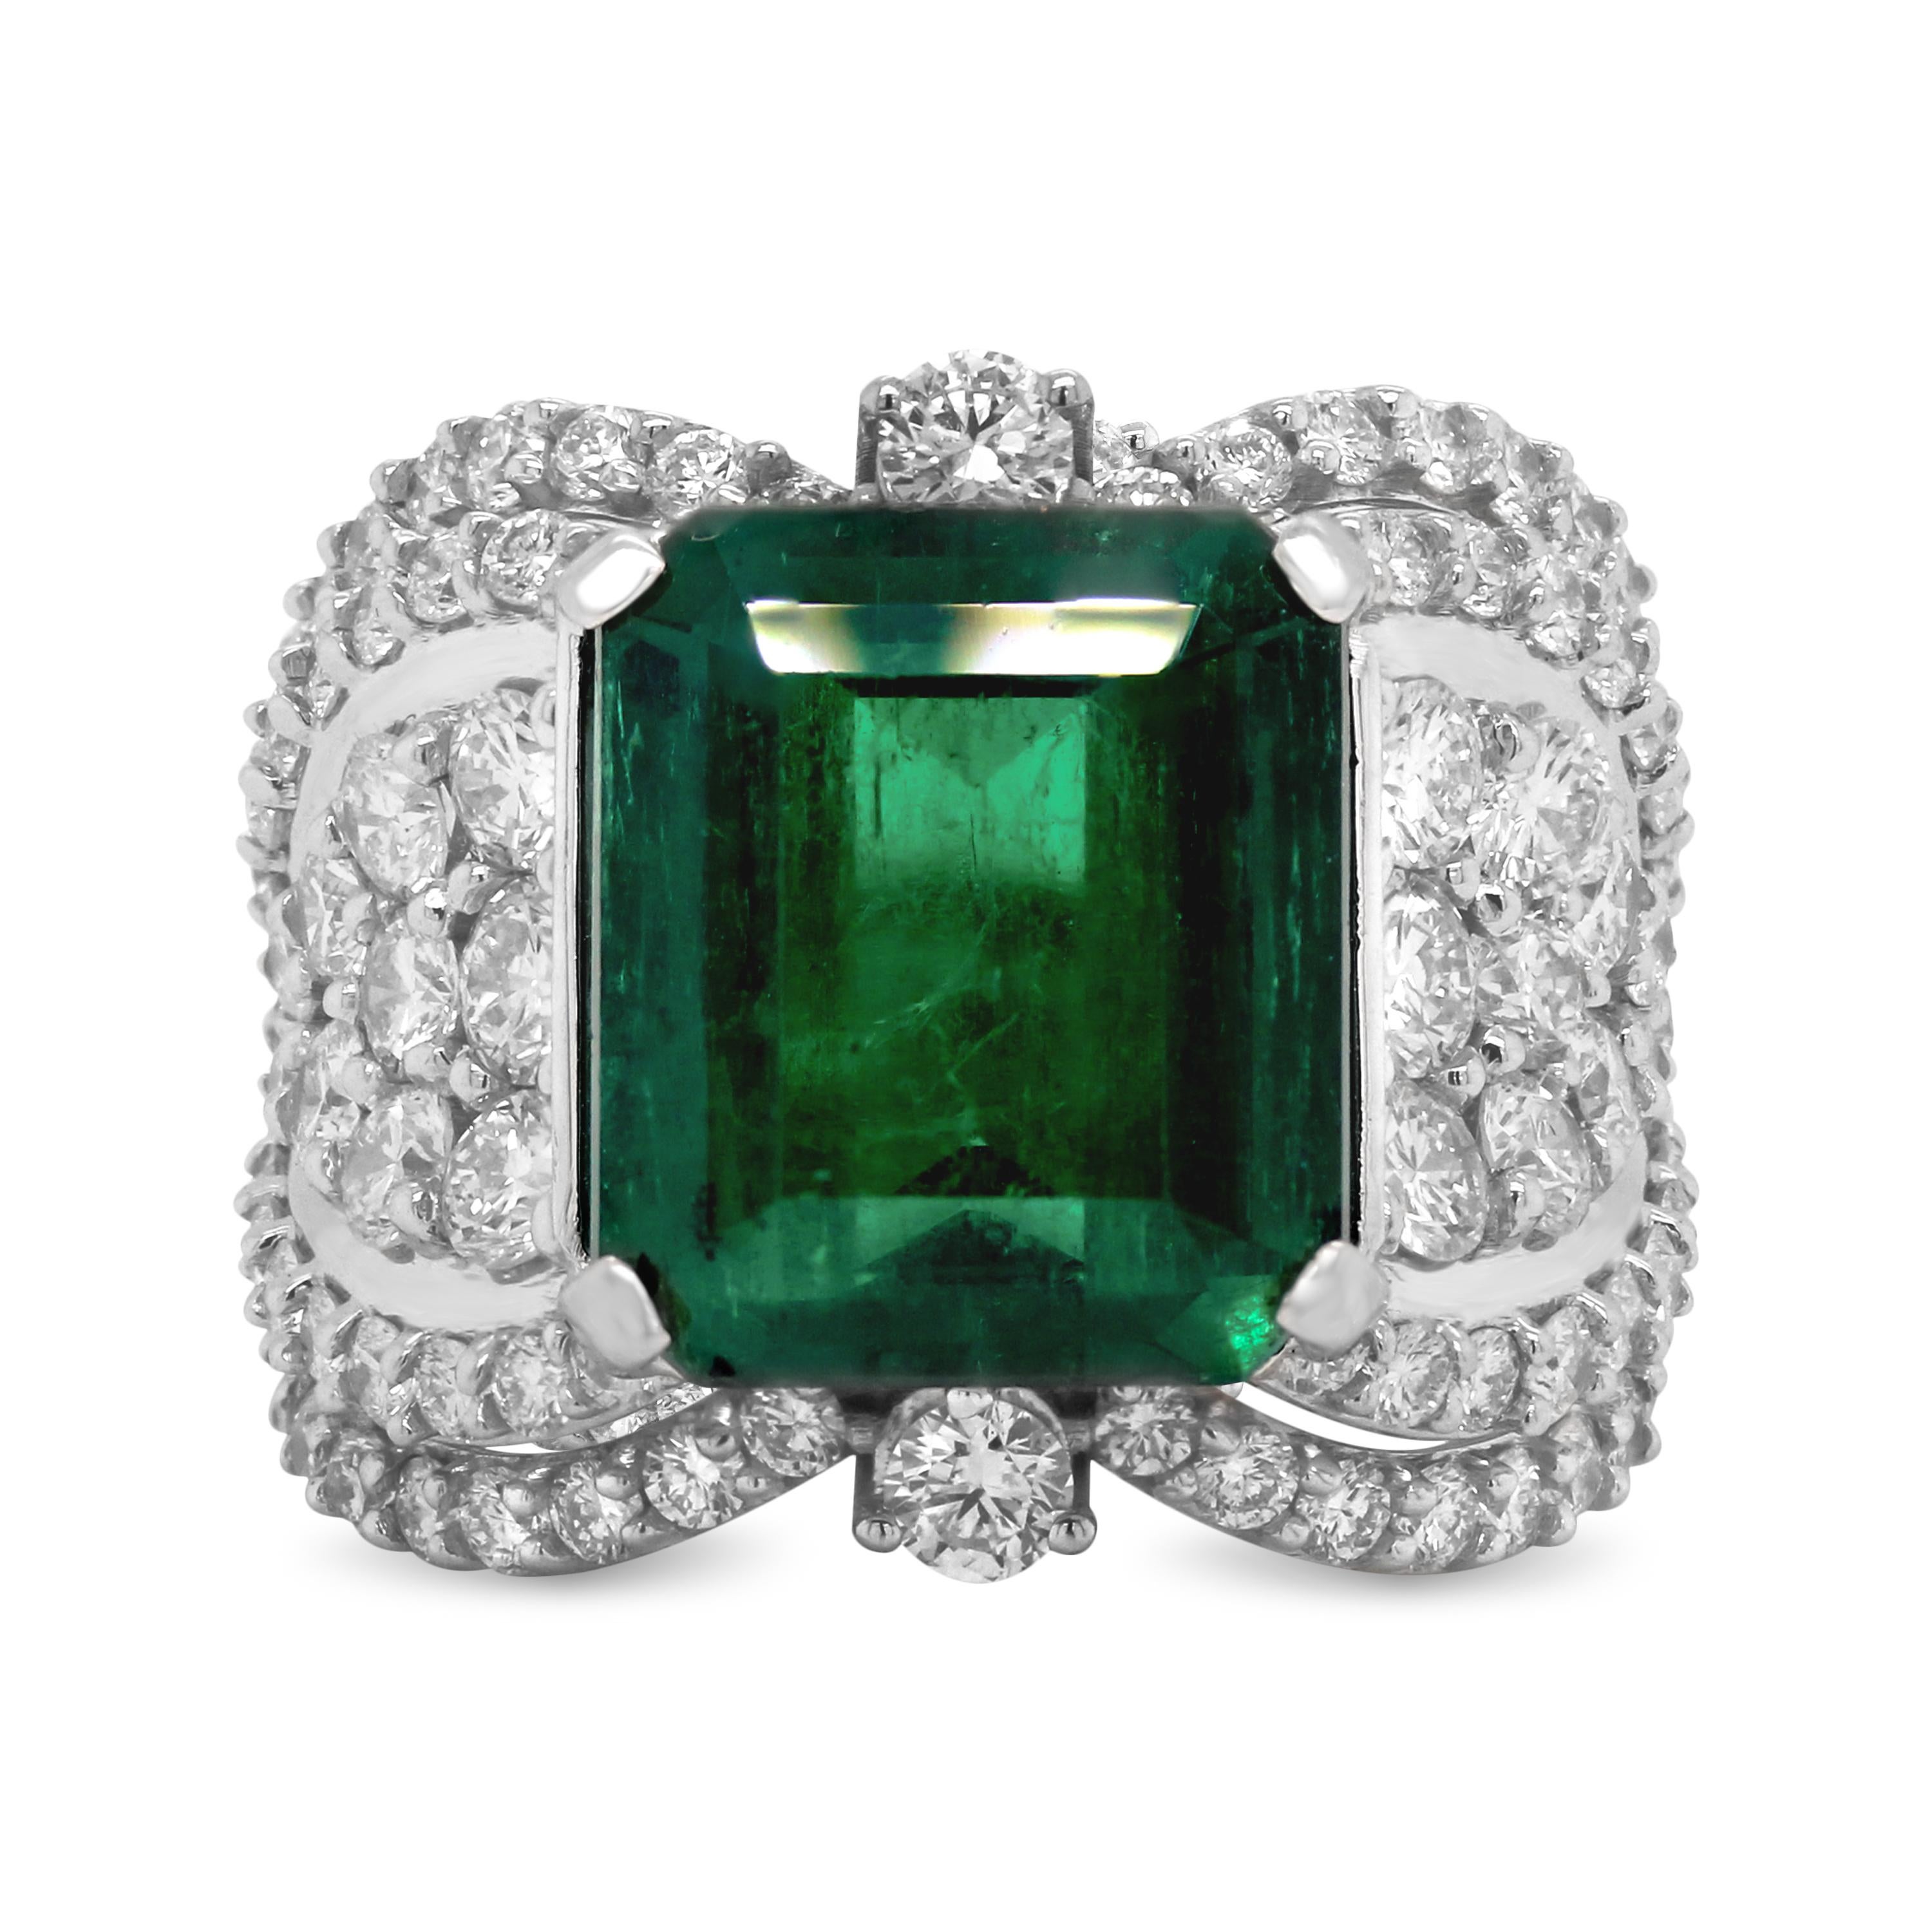 GIA Certified 7.25 Carat Colombian Emerald 18K White Gold Diamond Cocktail Ring 

This one-of-a-kind ring features a 7.25 carat natural Colombian Emerald that is an octagonal cut. GIA certificate states the Emerald is moderate clarity enhanced which